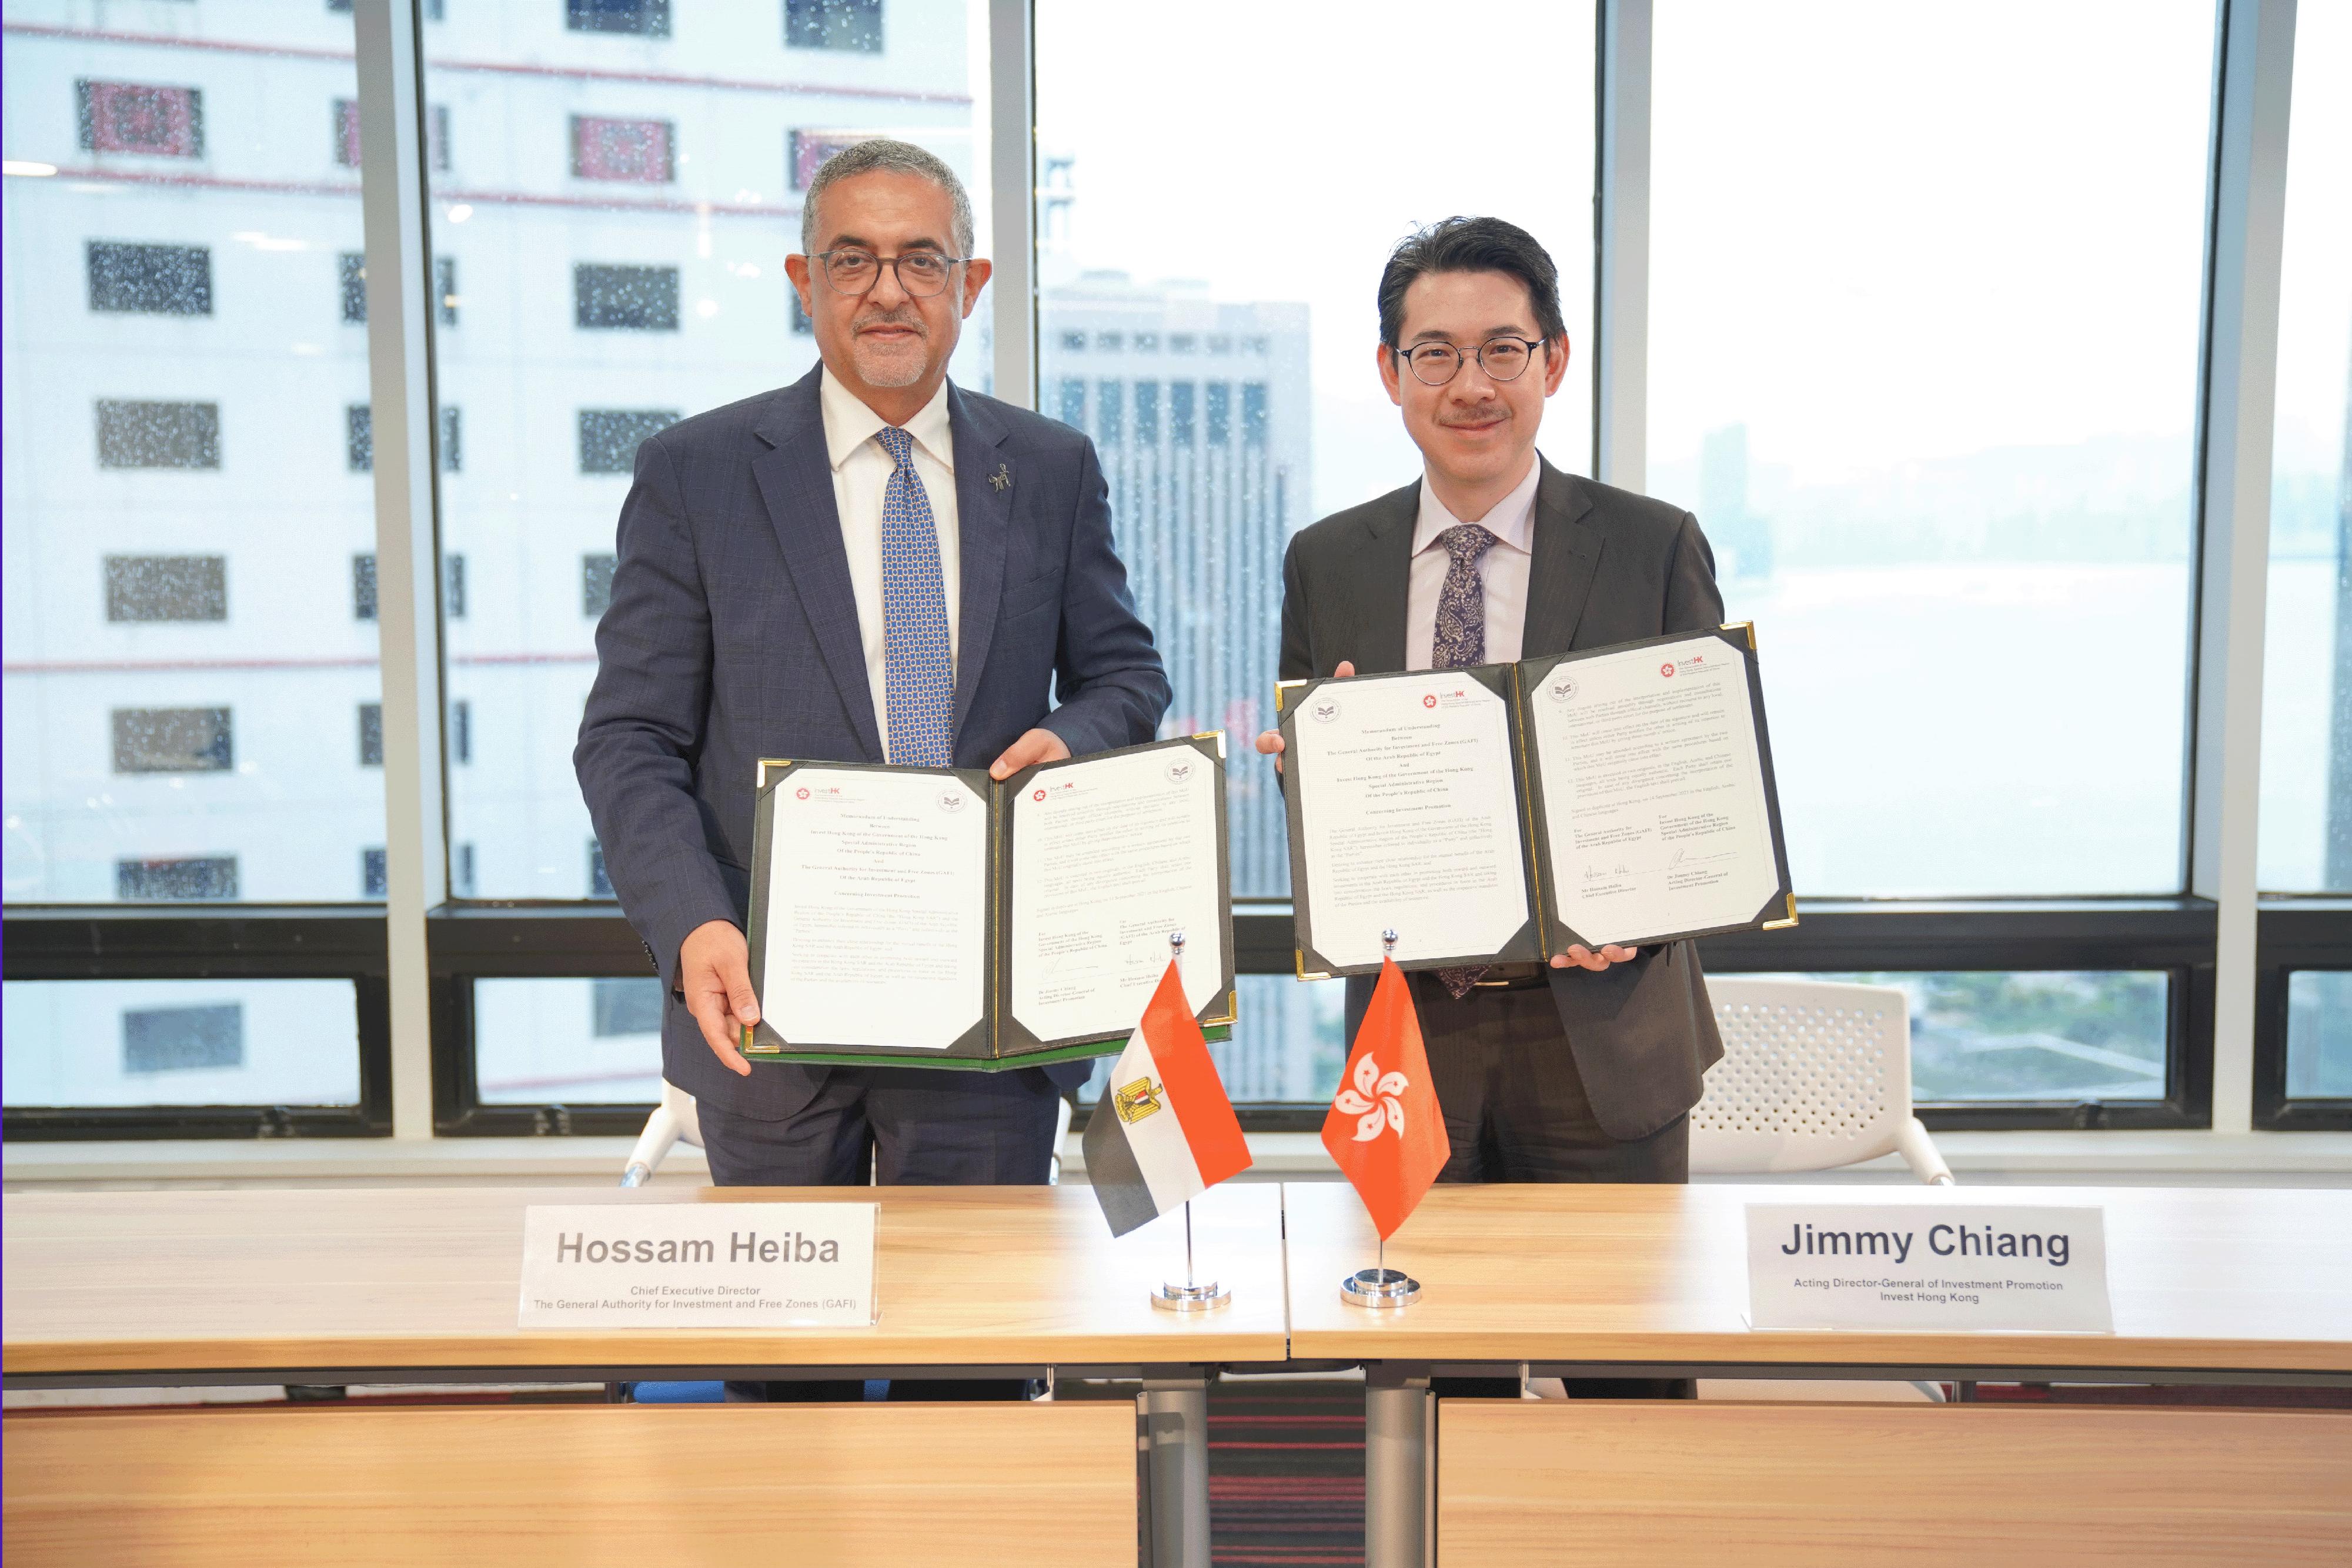 The Acting Director-General of Investment Promotion at Invest Hong Kong, Dr Jimmy Chiang (right), and the Chief Executive Director of the General Authority for Investment and Free Zones, Mr Hossam Heiba, sign a Memorandum of Understanding today (September 14) at InvestHK Head Office pledging mutual co-operation on investment promotion exchanges and support. 


